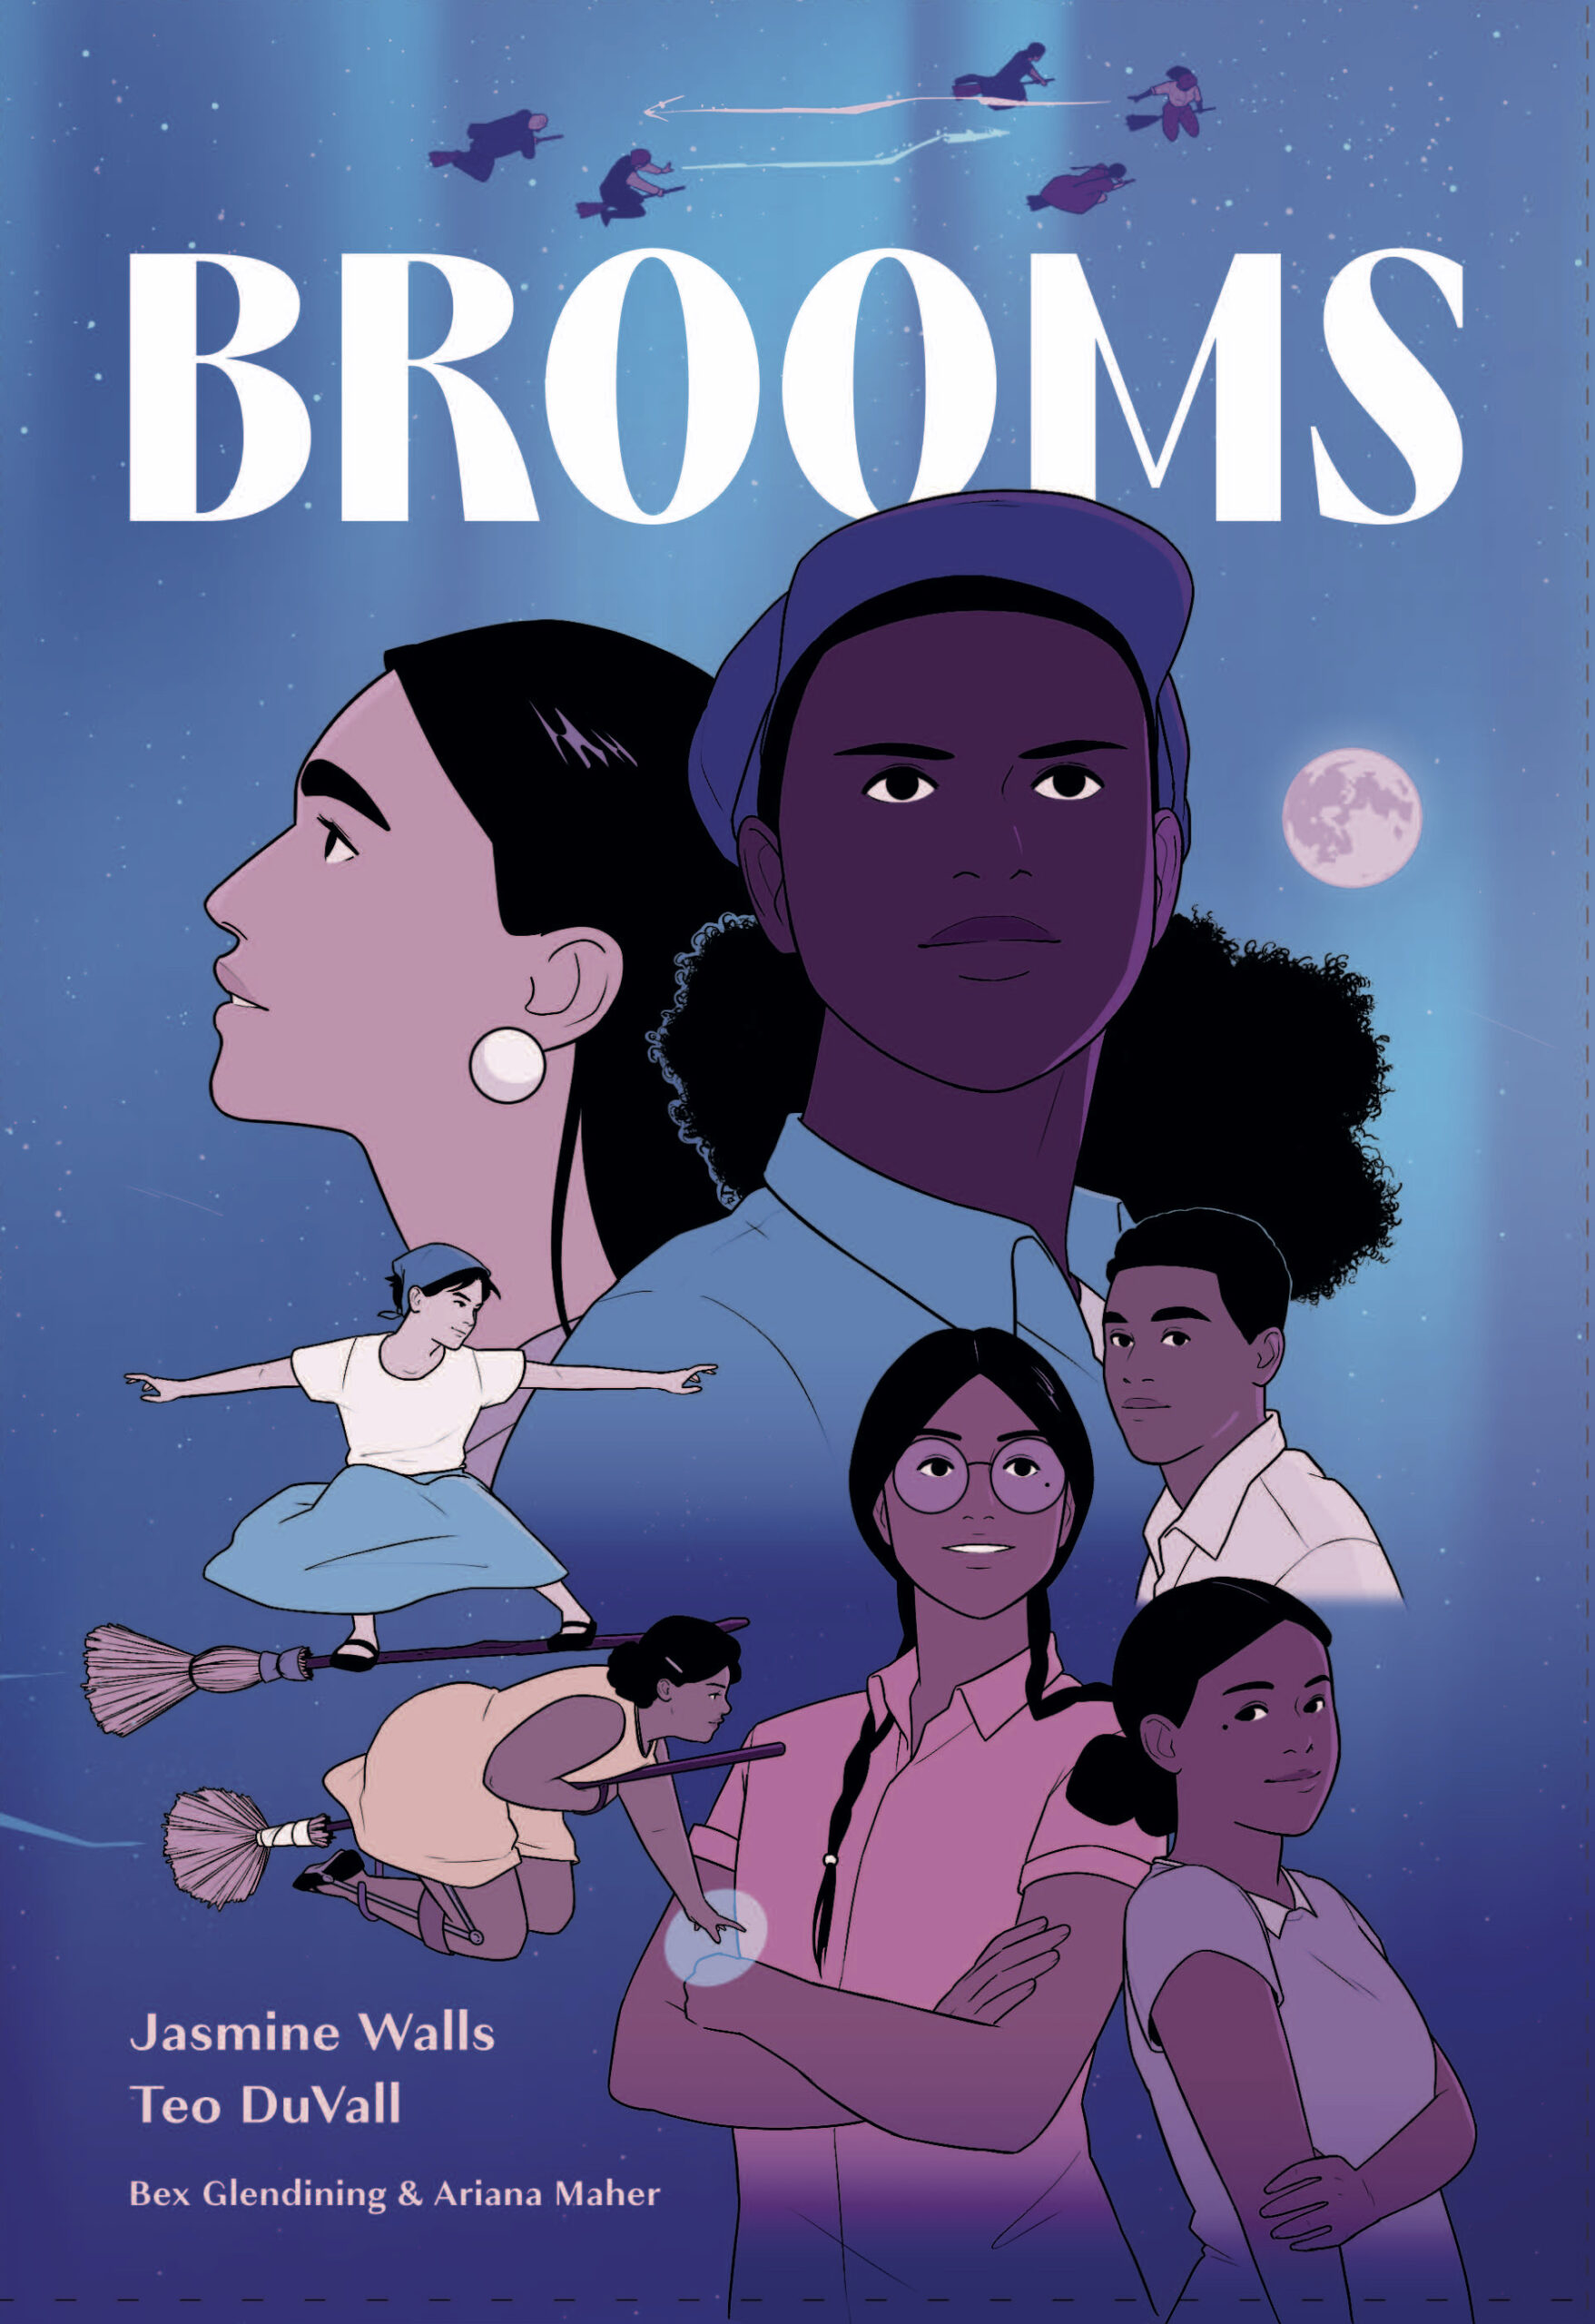 Interview with Jasmine Walls and Teo DuVall, Creators of Brooms